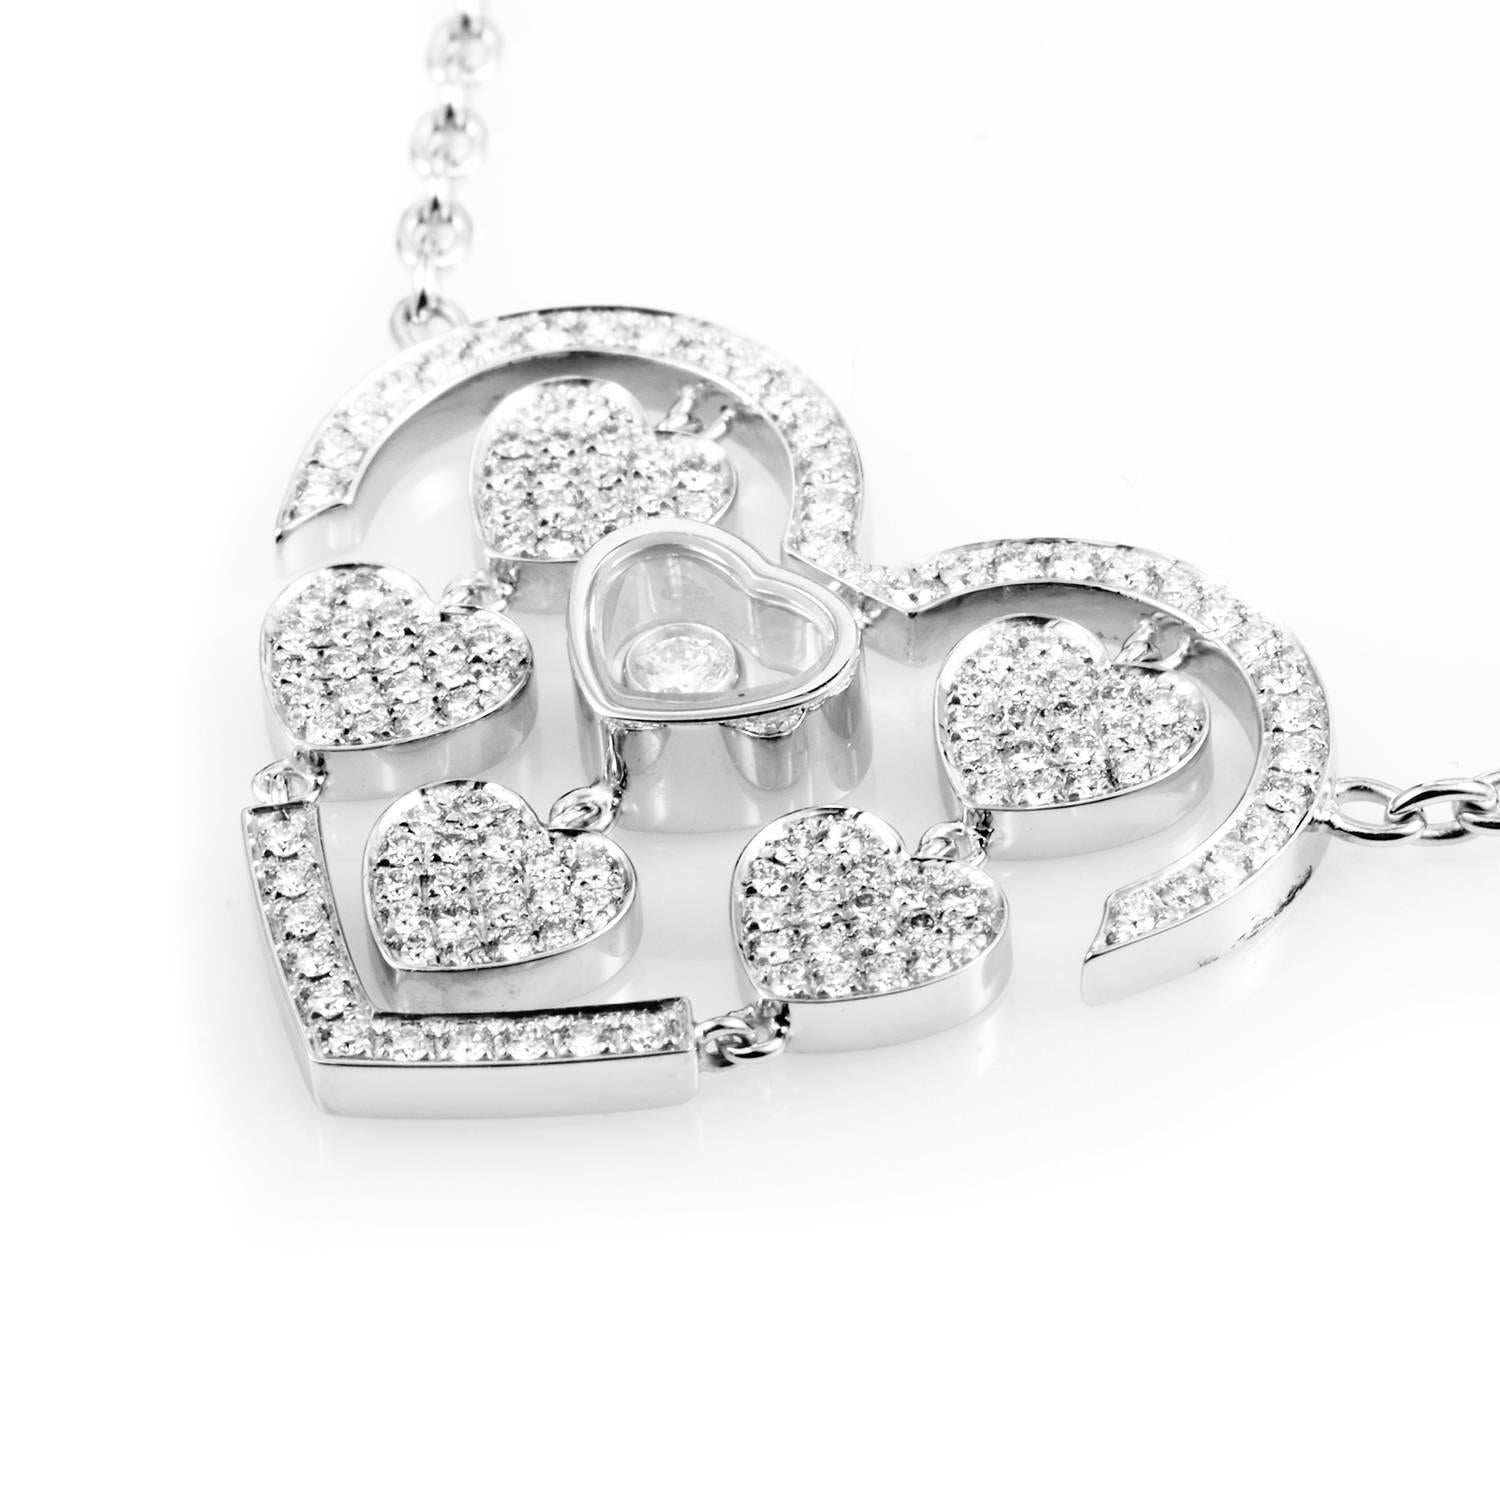 The resplendent heart-shaped pendant on this Chopard Happy Amore necklace will instantly catch your attention. In total, the necklace is set with 1.23 ct. of diamonds. Its 18K white gold chain, which is fitted with a durable lobster closure,